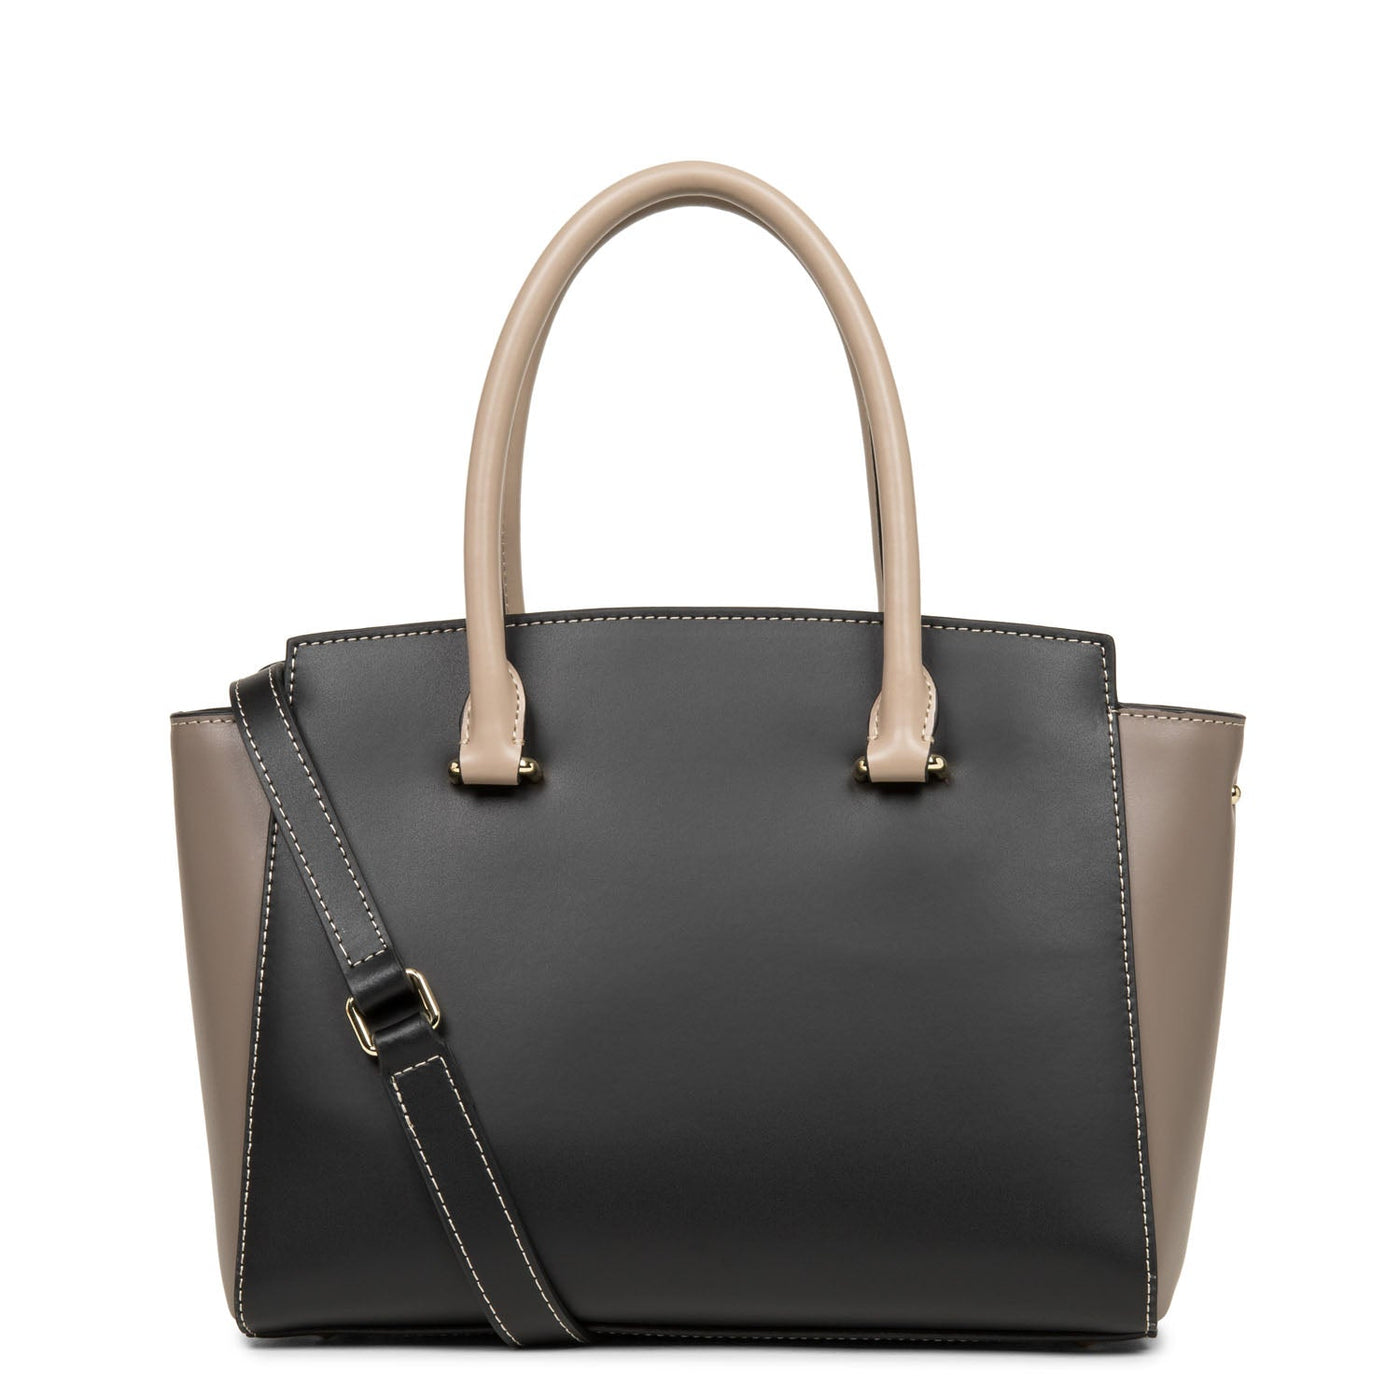 handbag - smooth or #couleur_noir-taupe-nude-fonce